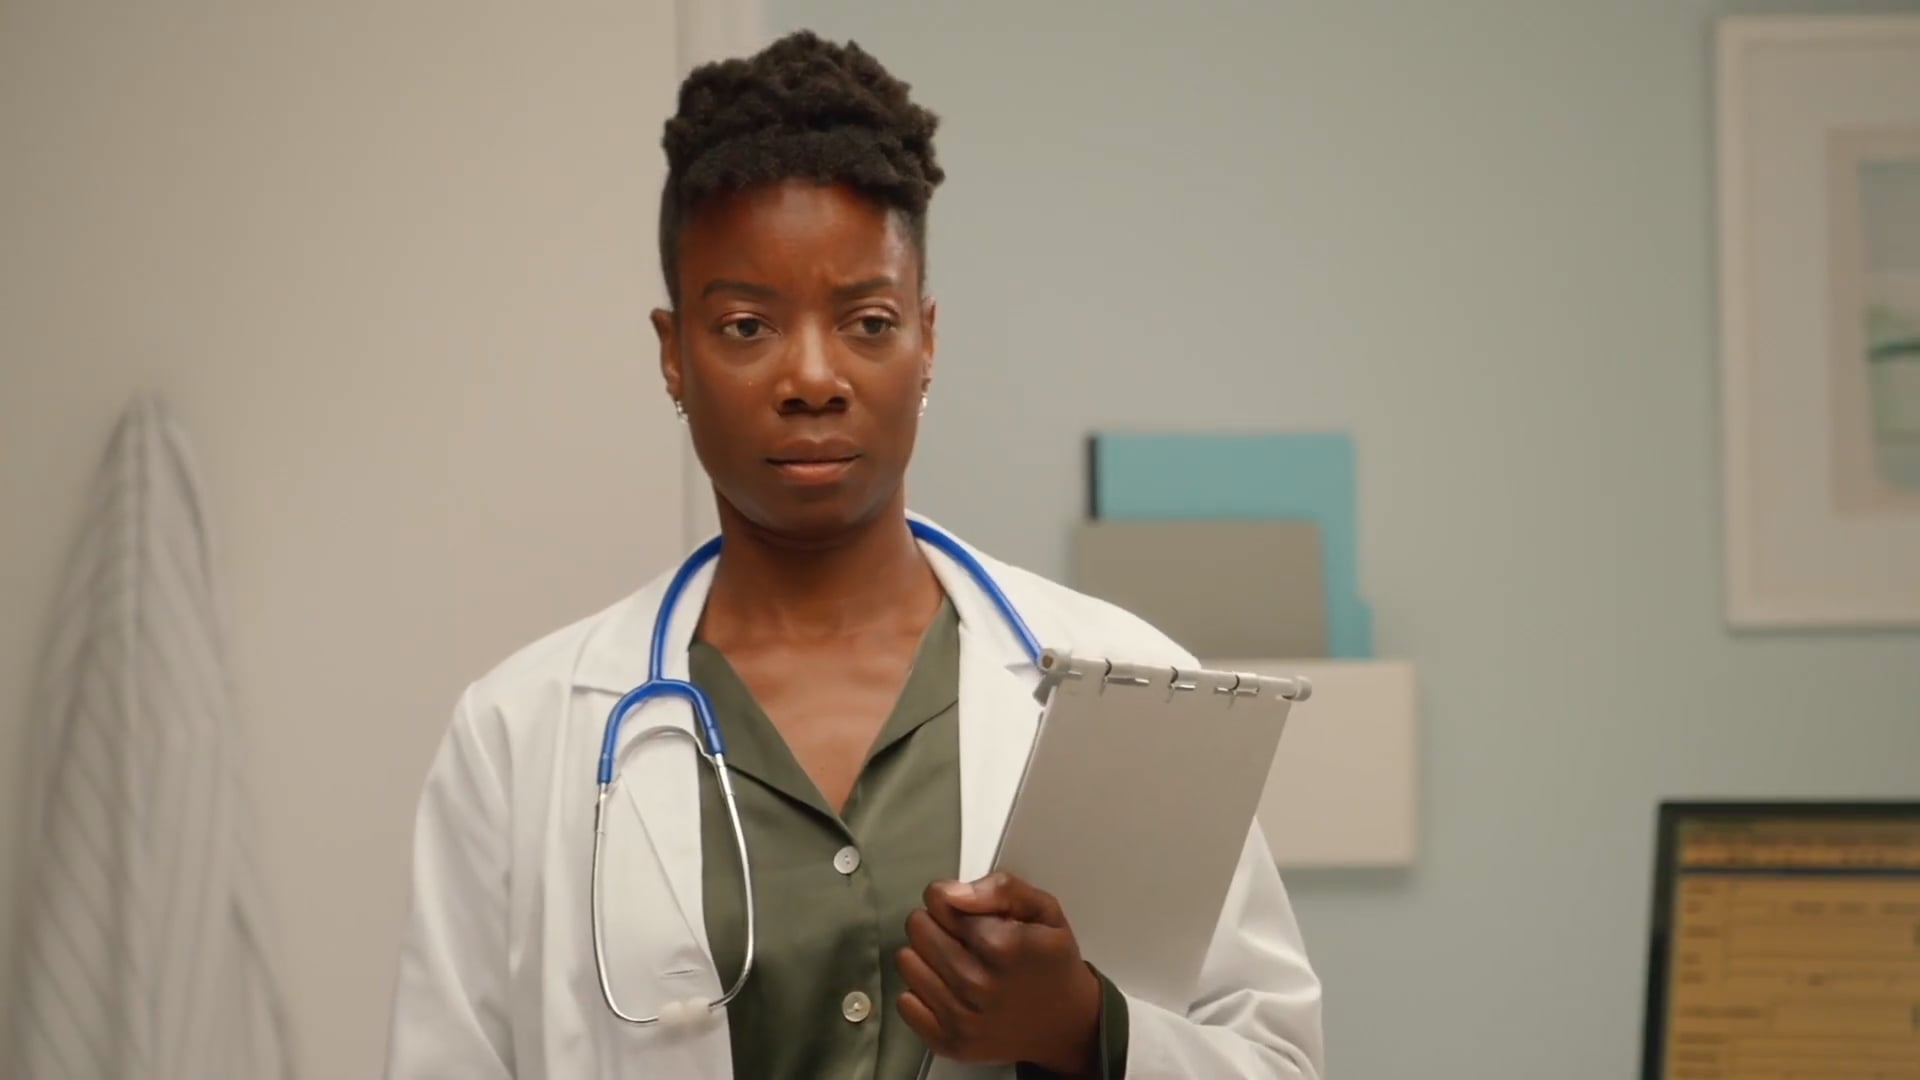 “Under the Paper Gown” with Amber Ruffin | Episode 2 (shorter)